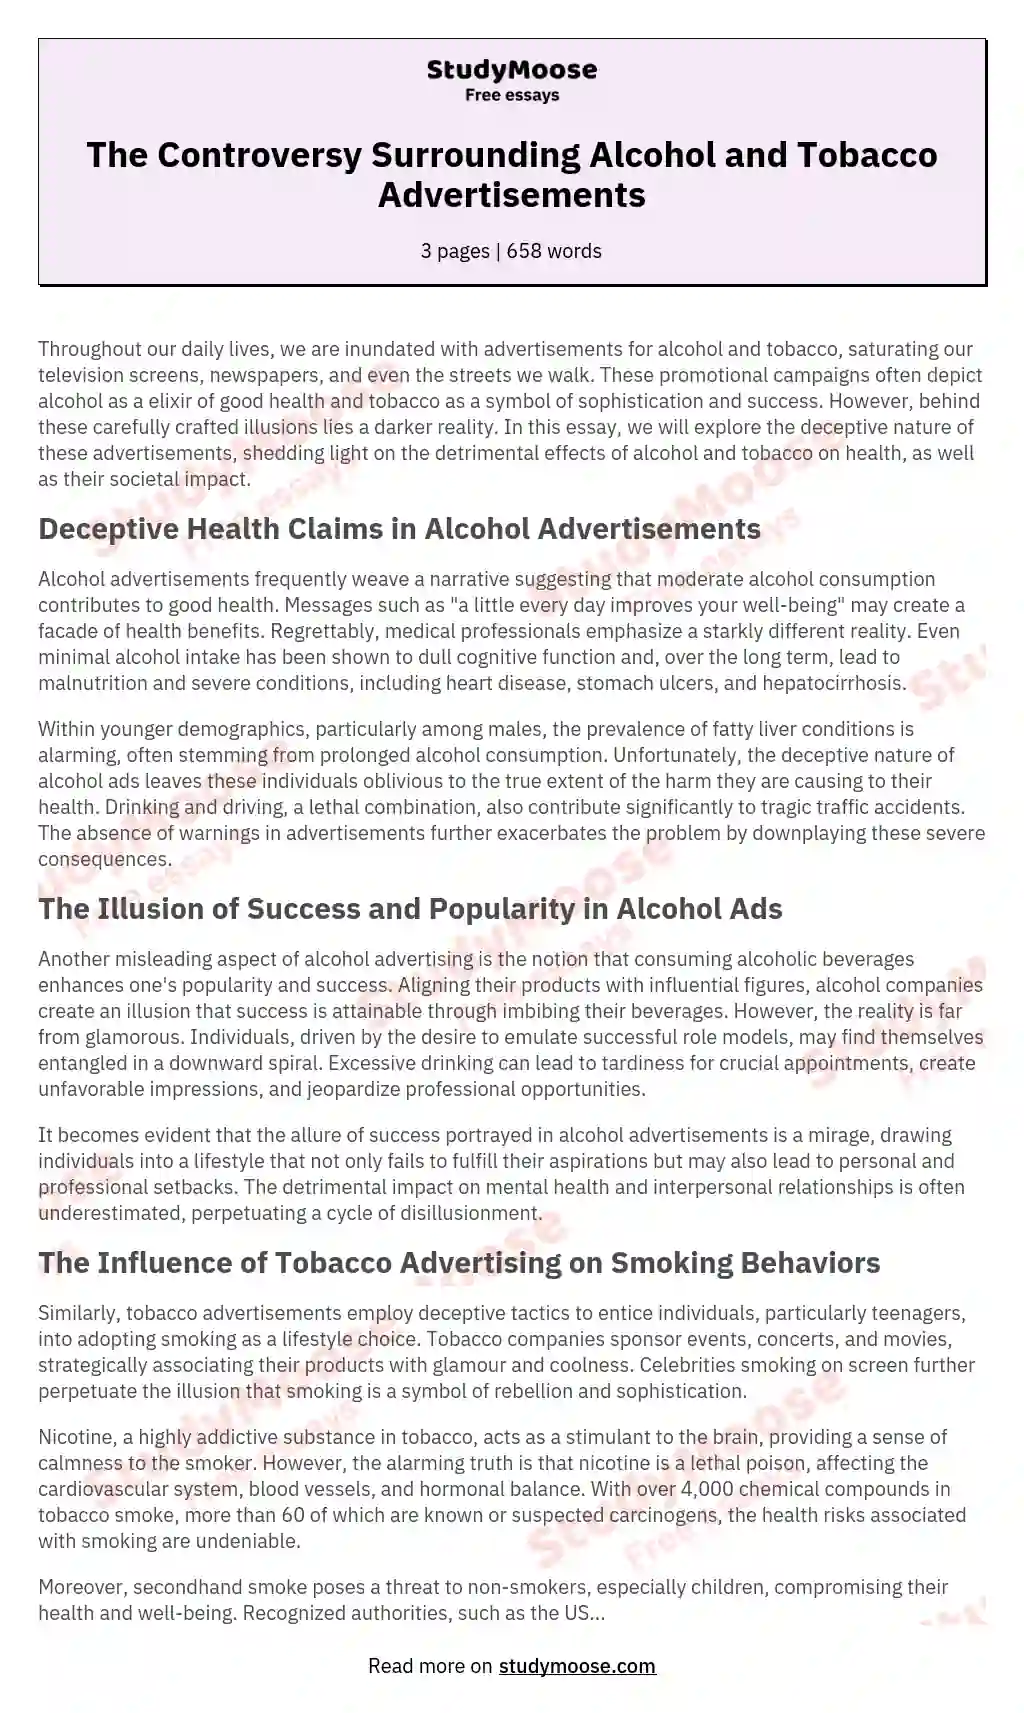 Should Alcohol and Tobacco Advertisement Be Banned